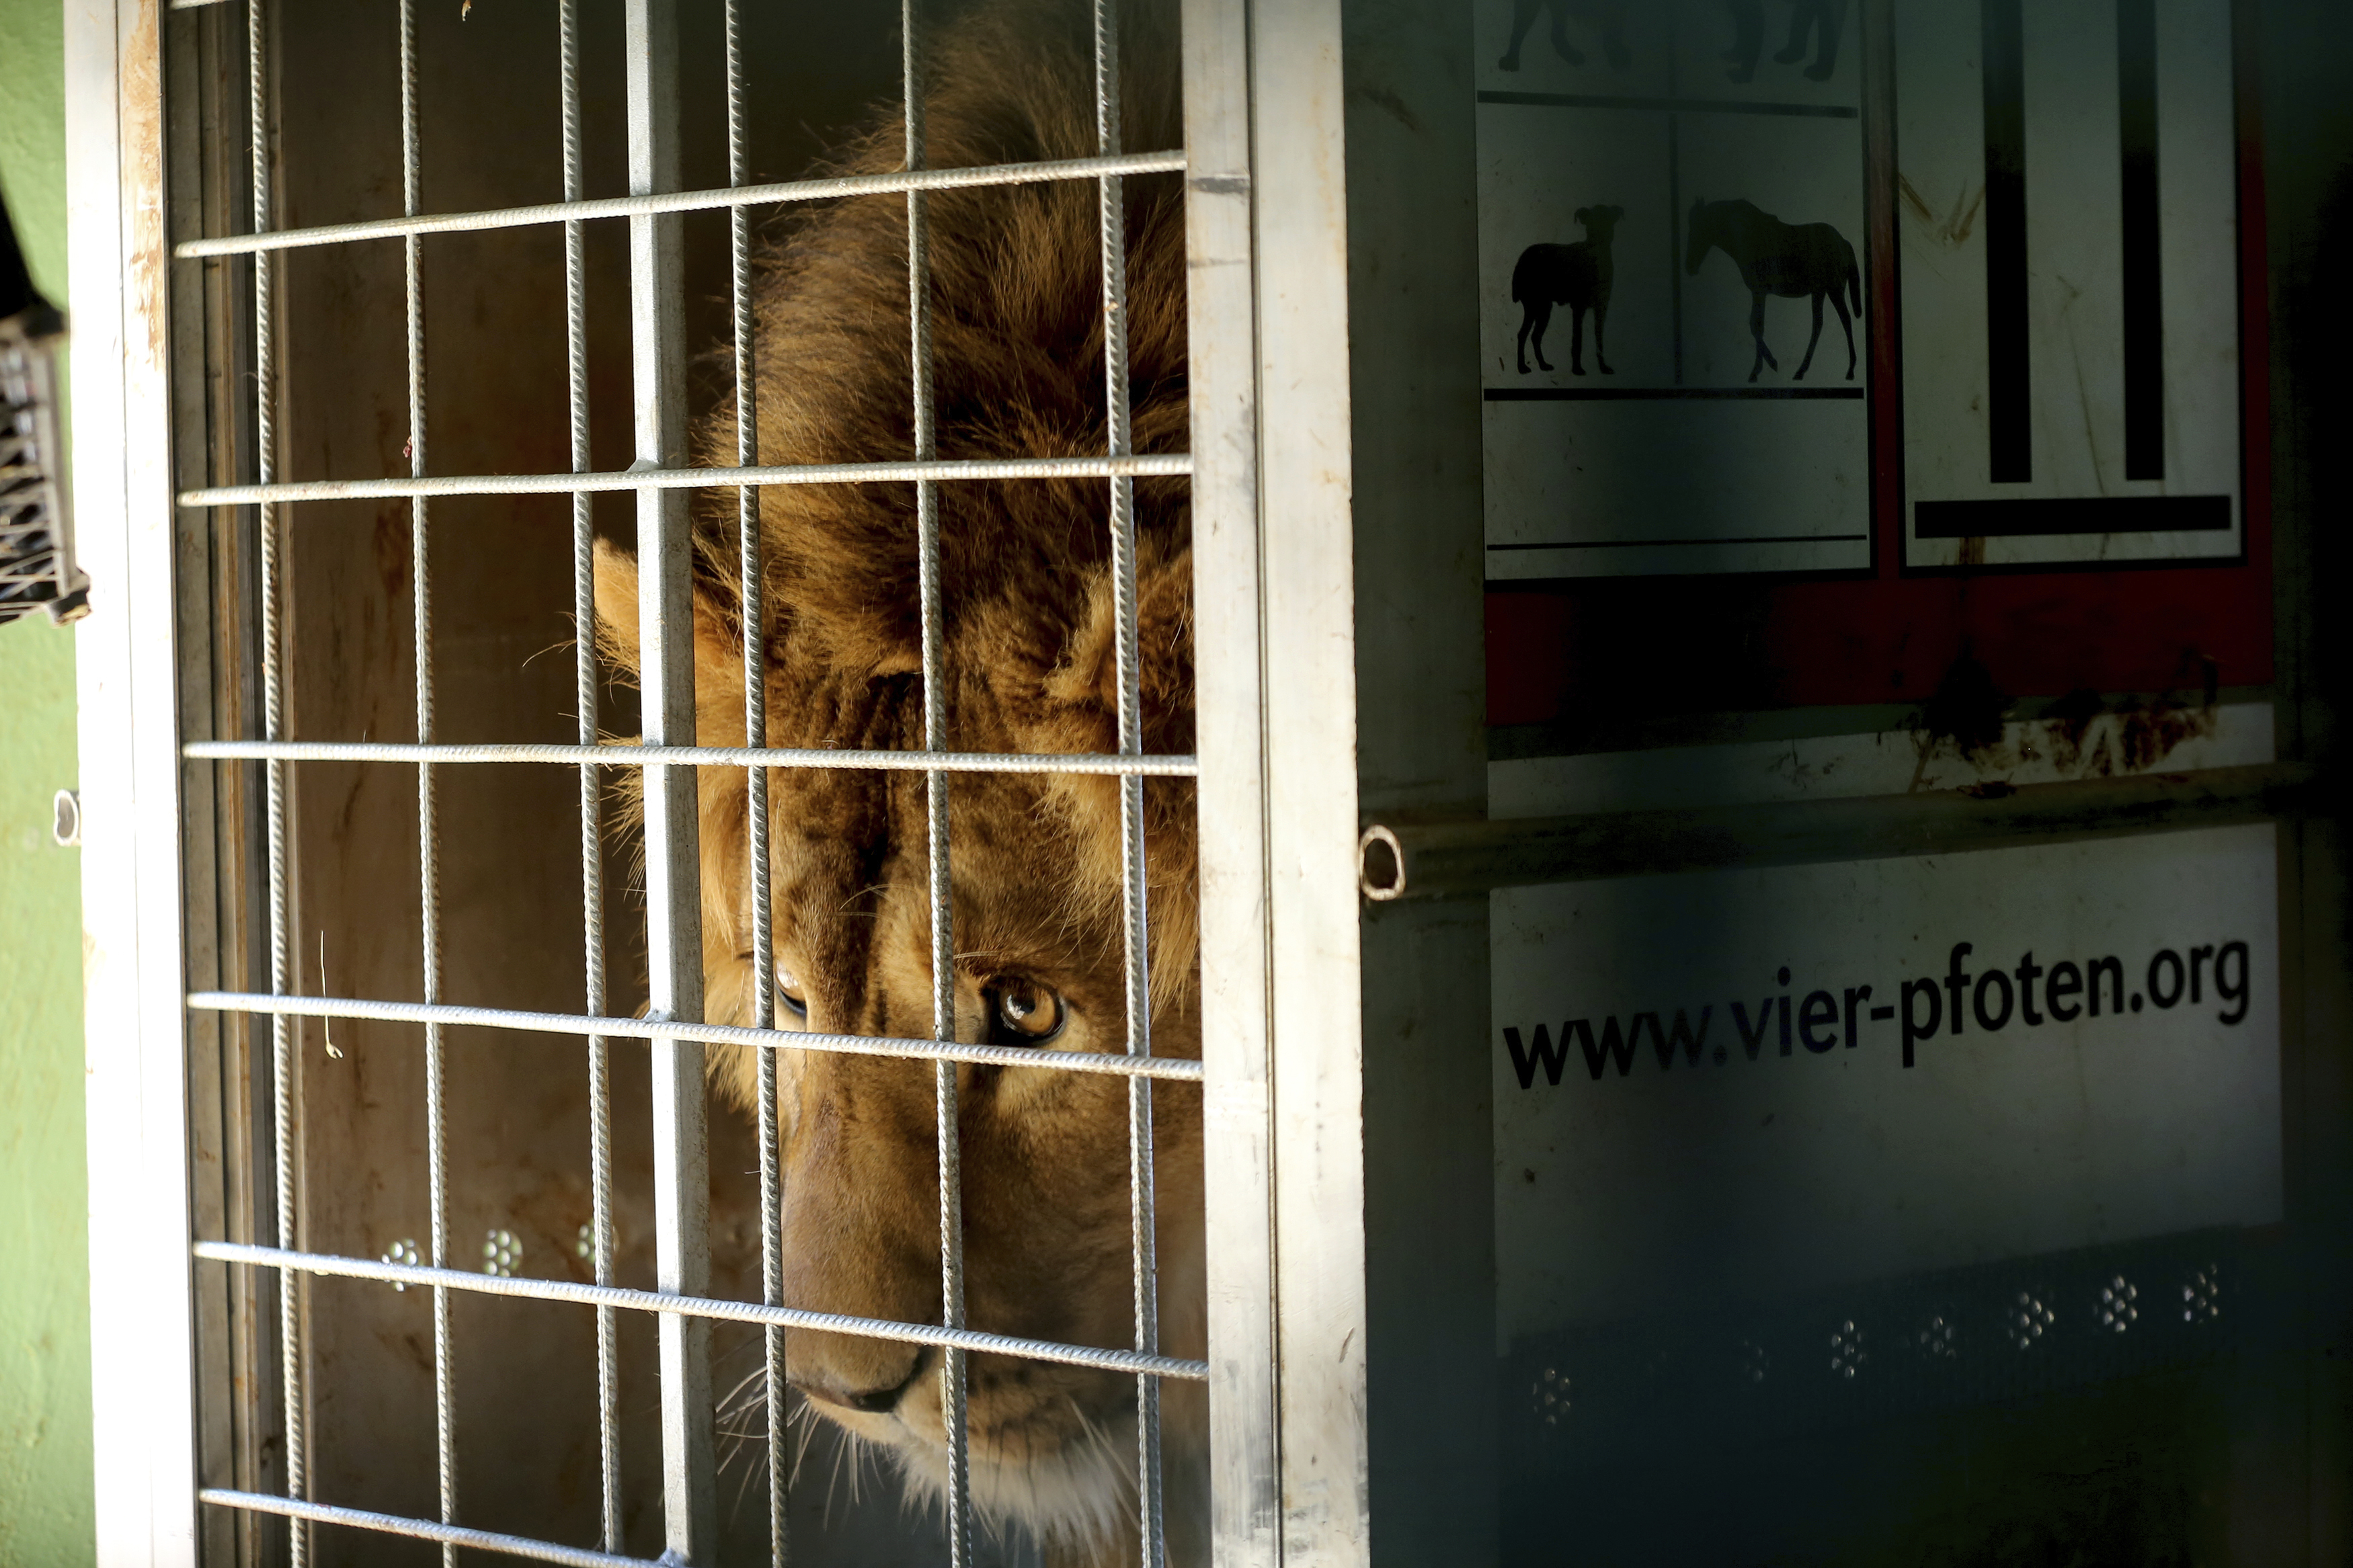 lion named Saeed, who was rescued from Syria by the animal rights group Four Paws (AP Photo/Raad Adayleh)